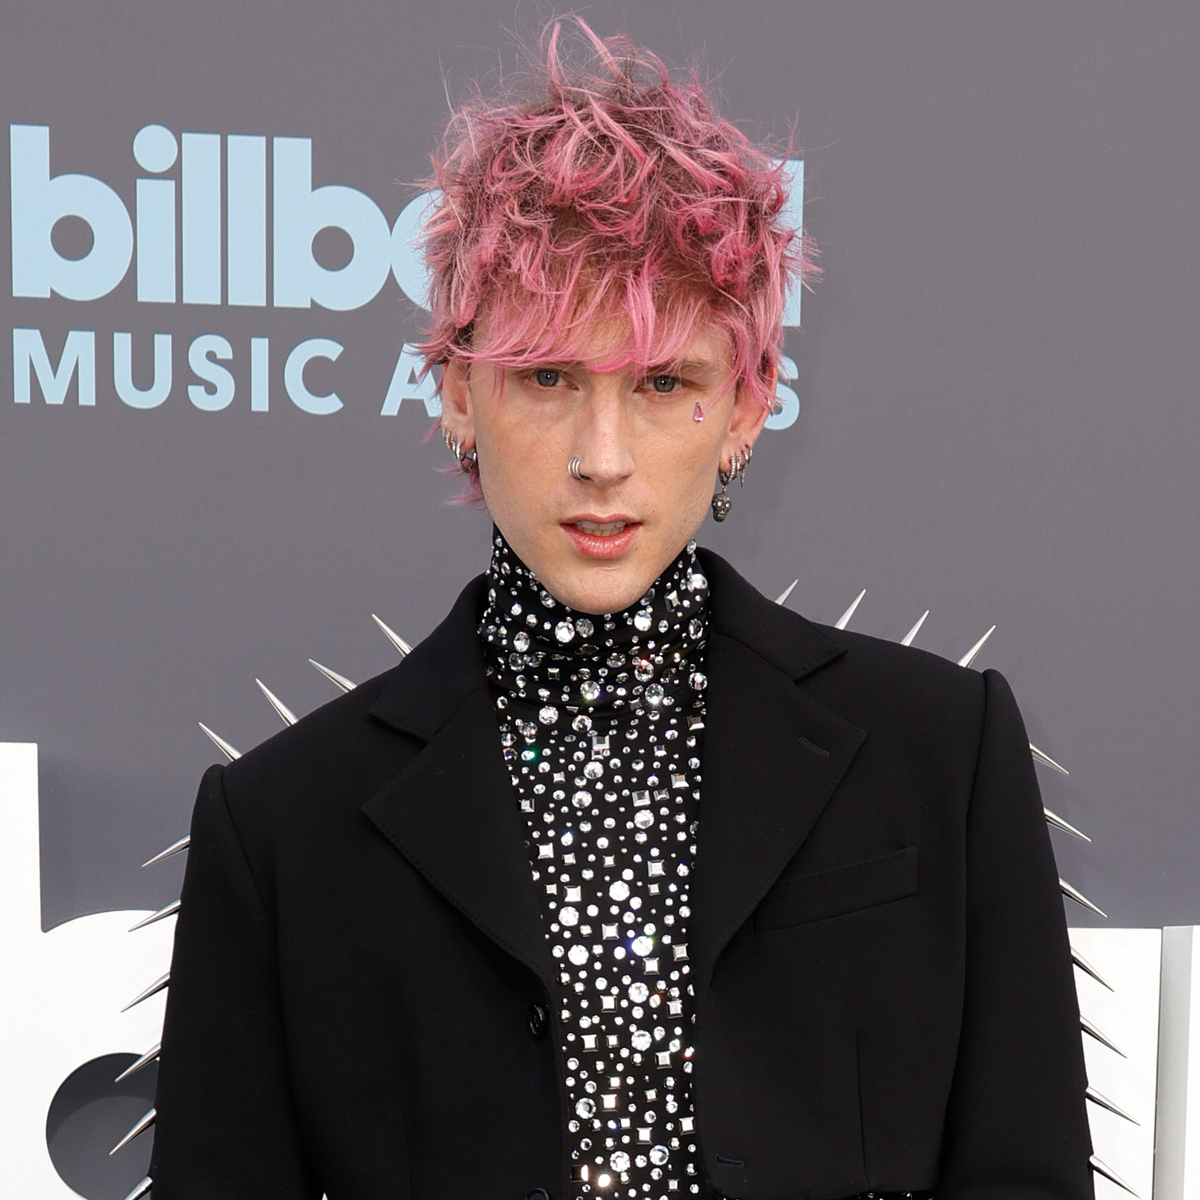 Machine Gun Kelly looks like quite the cool dad in punky attire